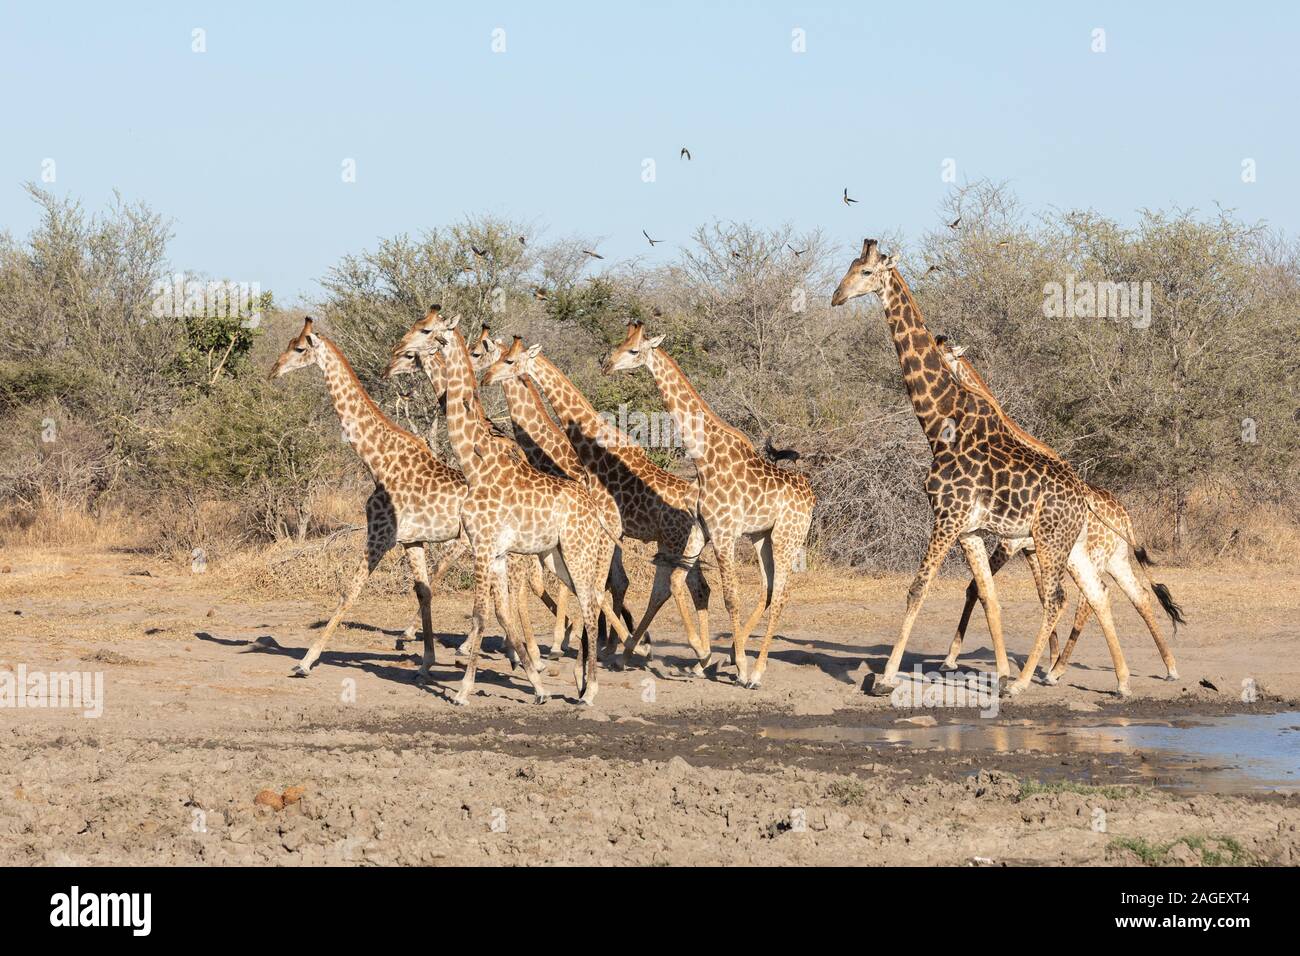 Southern Giraffe herd running in Kruger National Park, South Africa Stock Photo